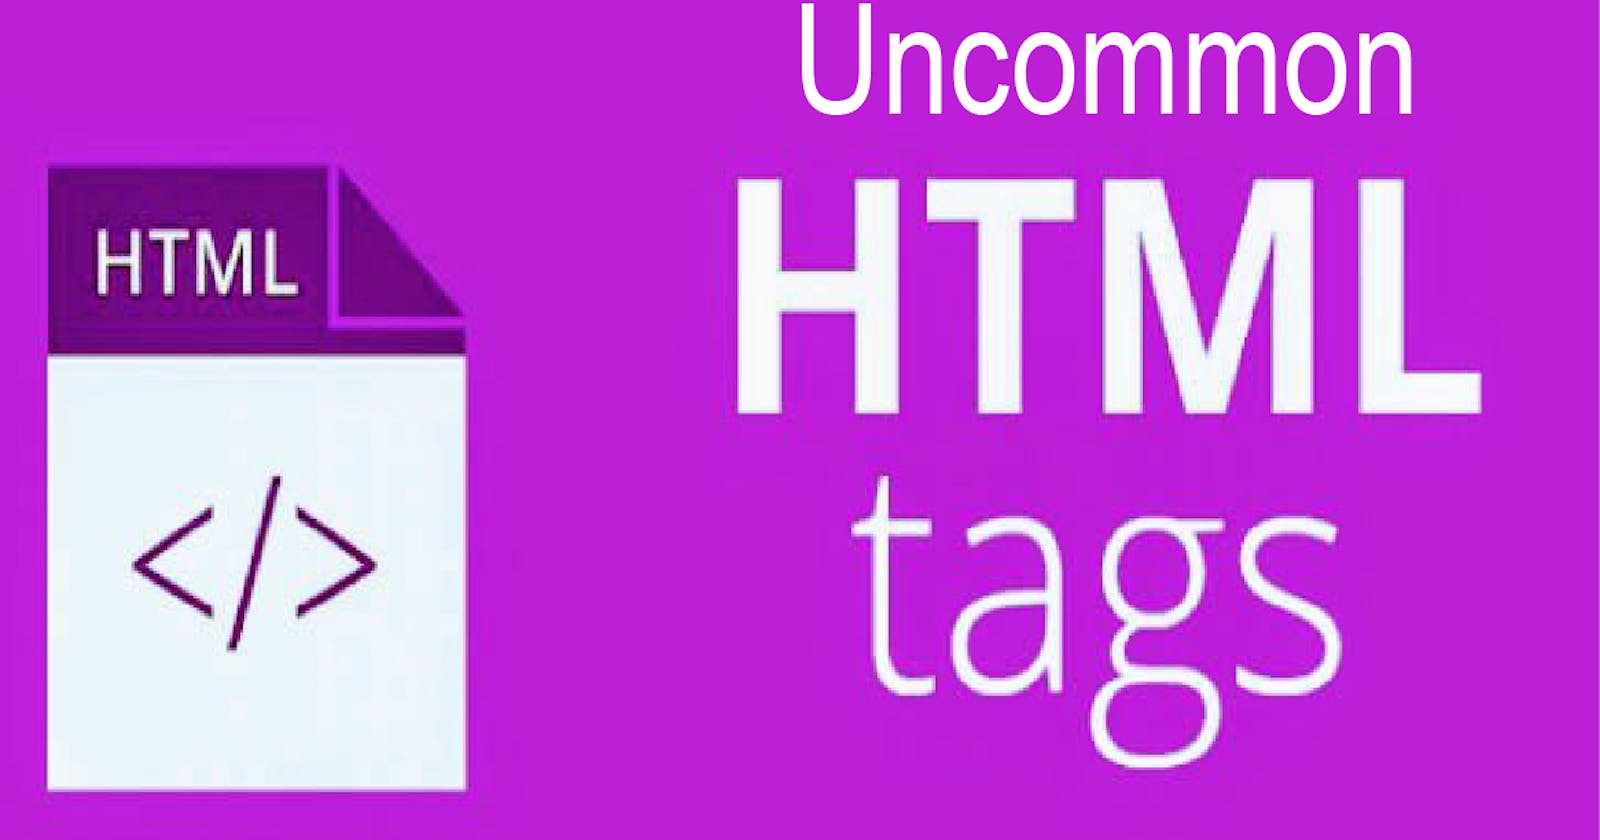 Uncommon HTML Tags